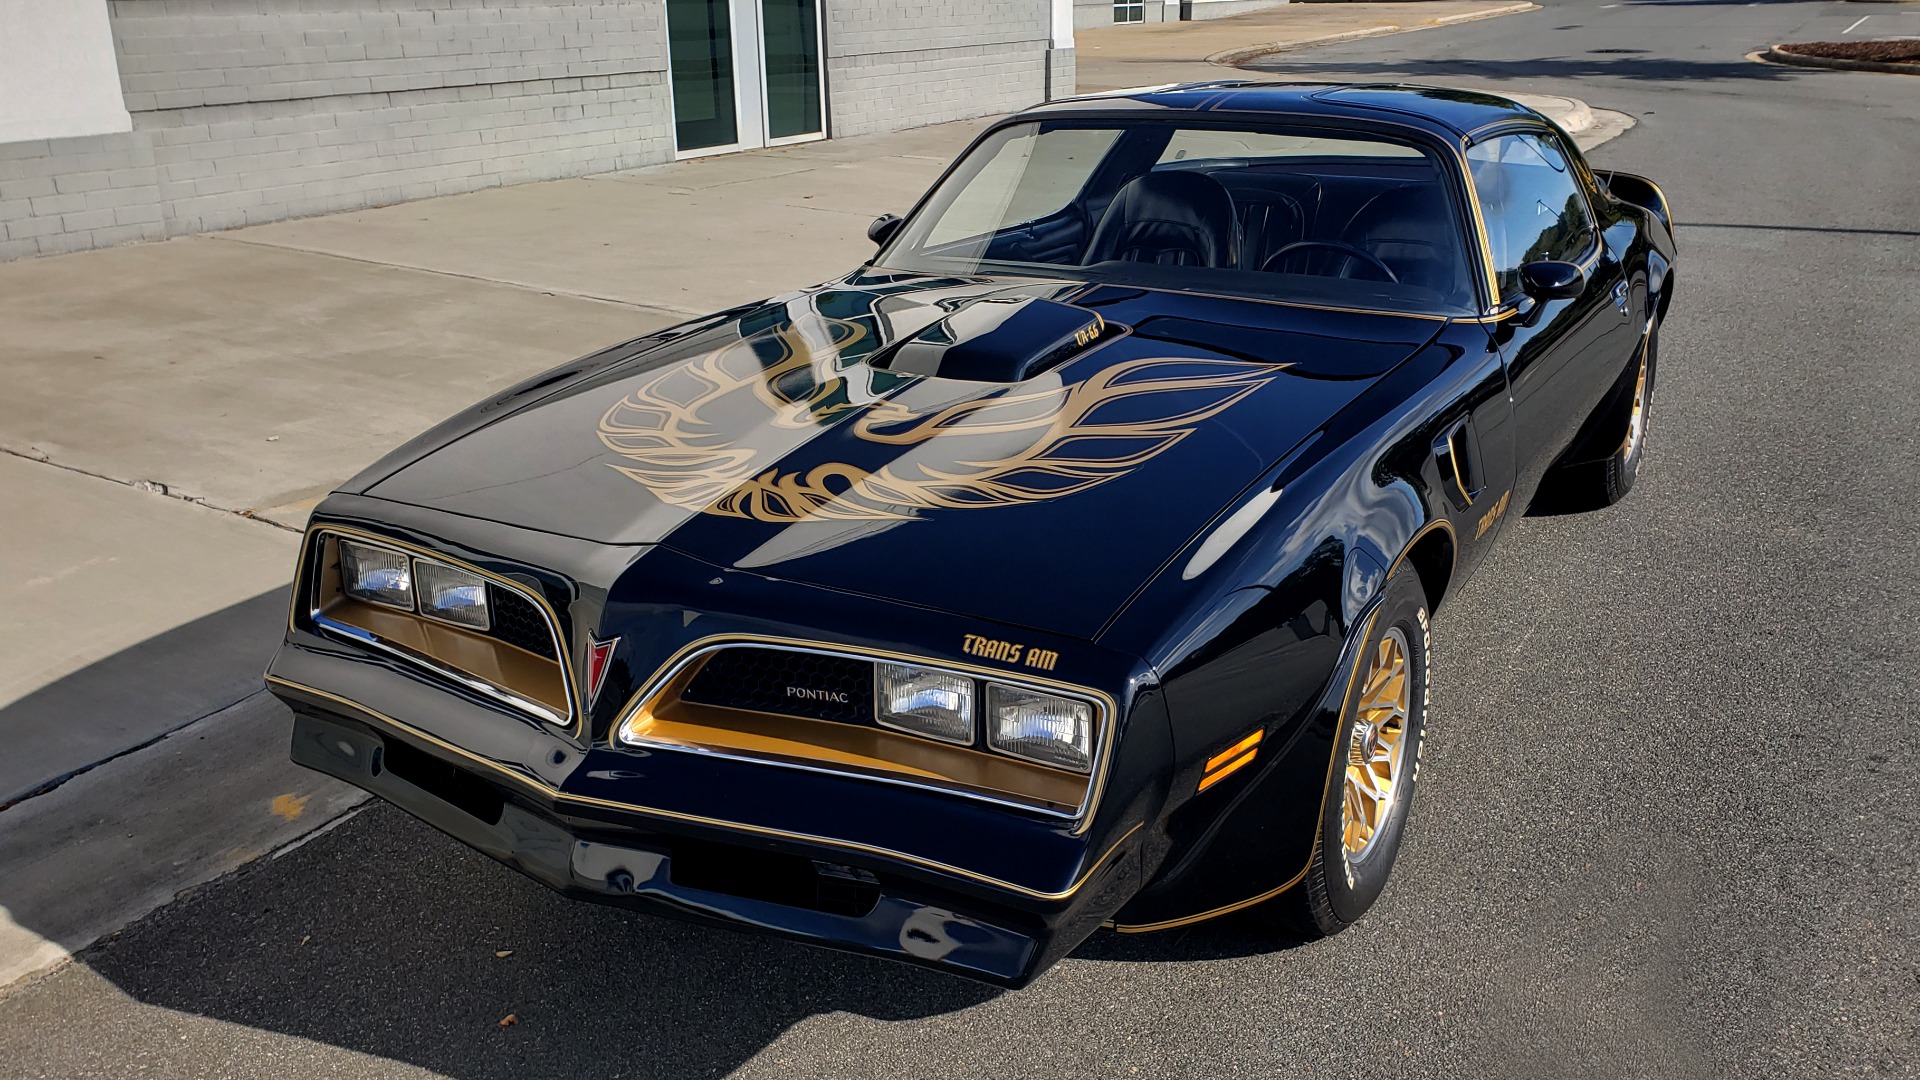 Used 1977 Pontiac TRANS AM Y82 SPECIAL EDITION BANDIT / 6.6L / 4-SPEED MANUAL / LOW MILES for sale Sold at Formula Imports in Charlotte NC 28227 4